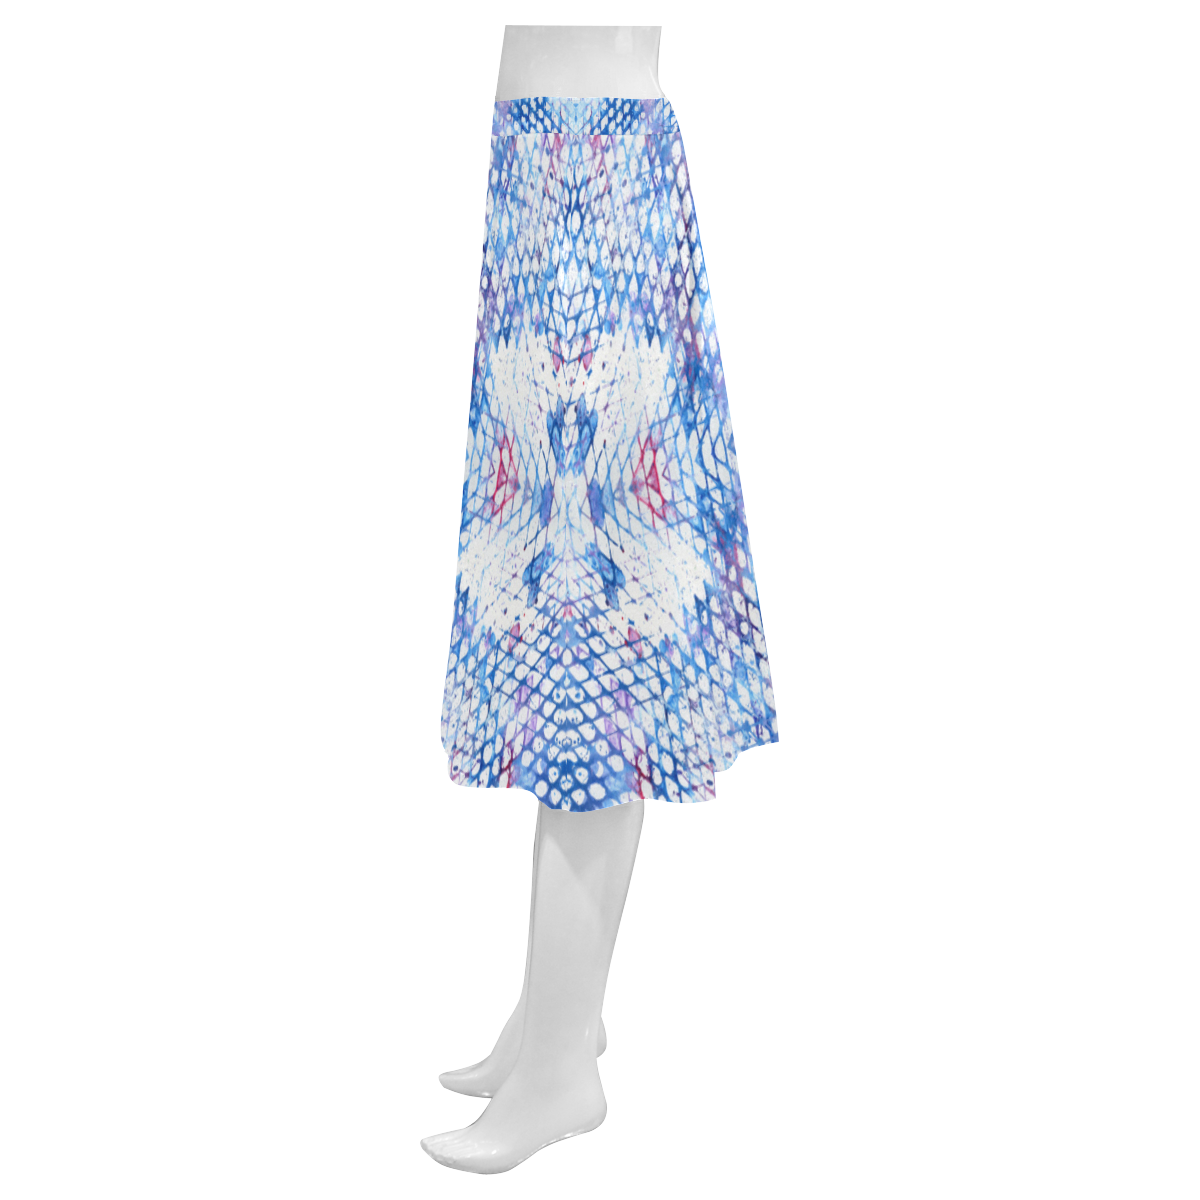 Fences - The Gathering Place Mnemosyne Women's Crepe Skirt (Model D16)